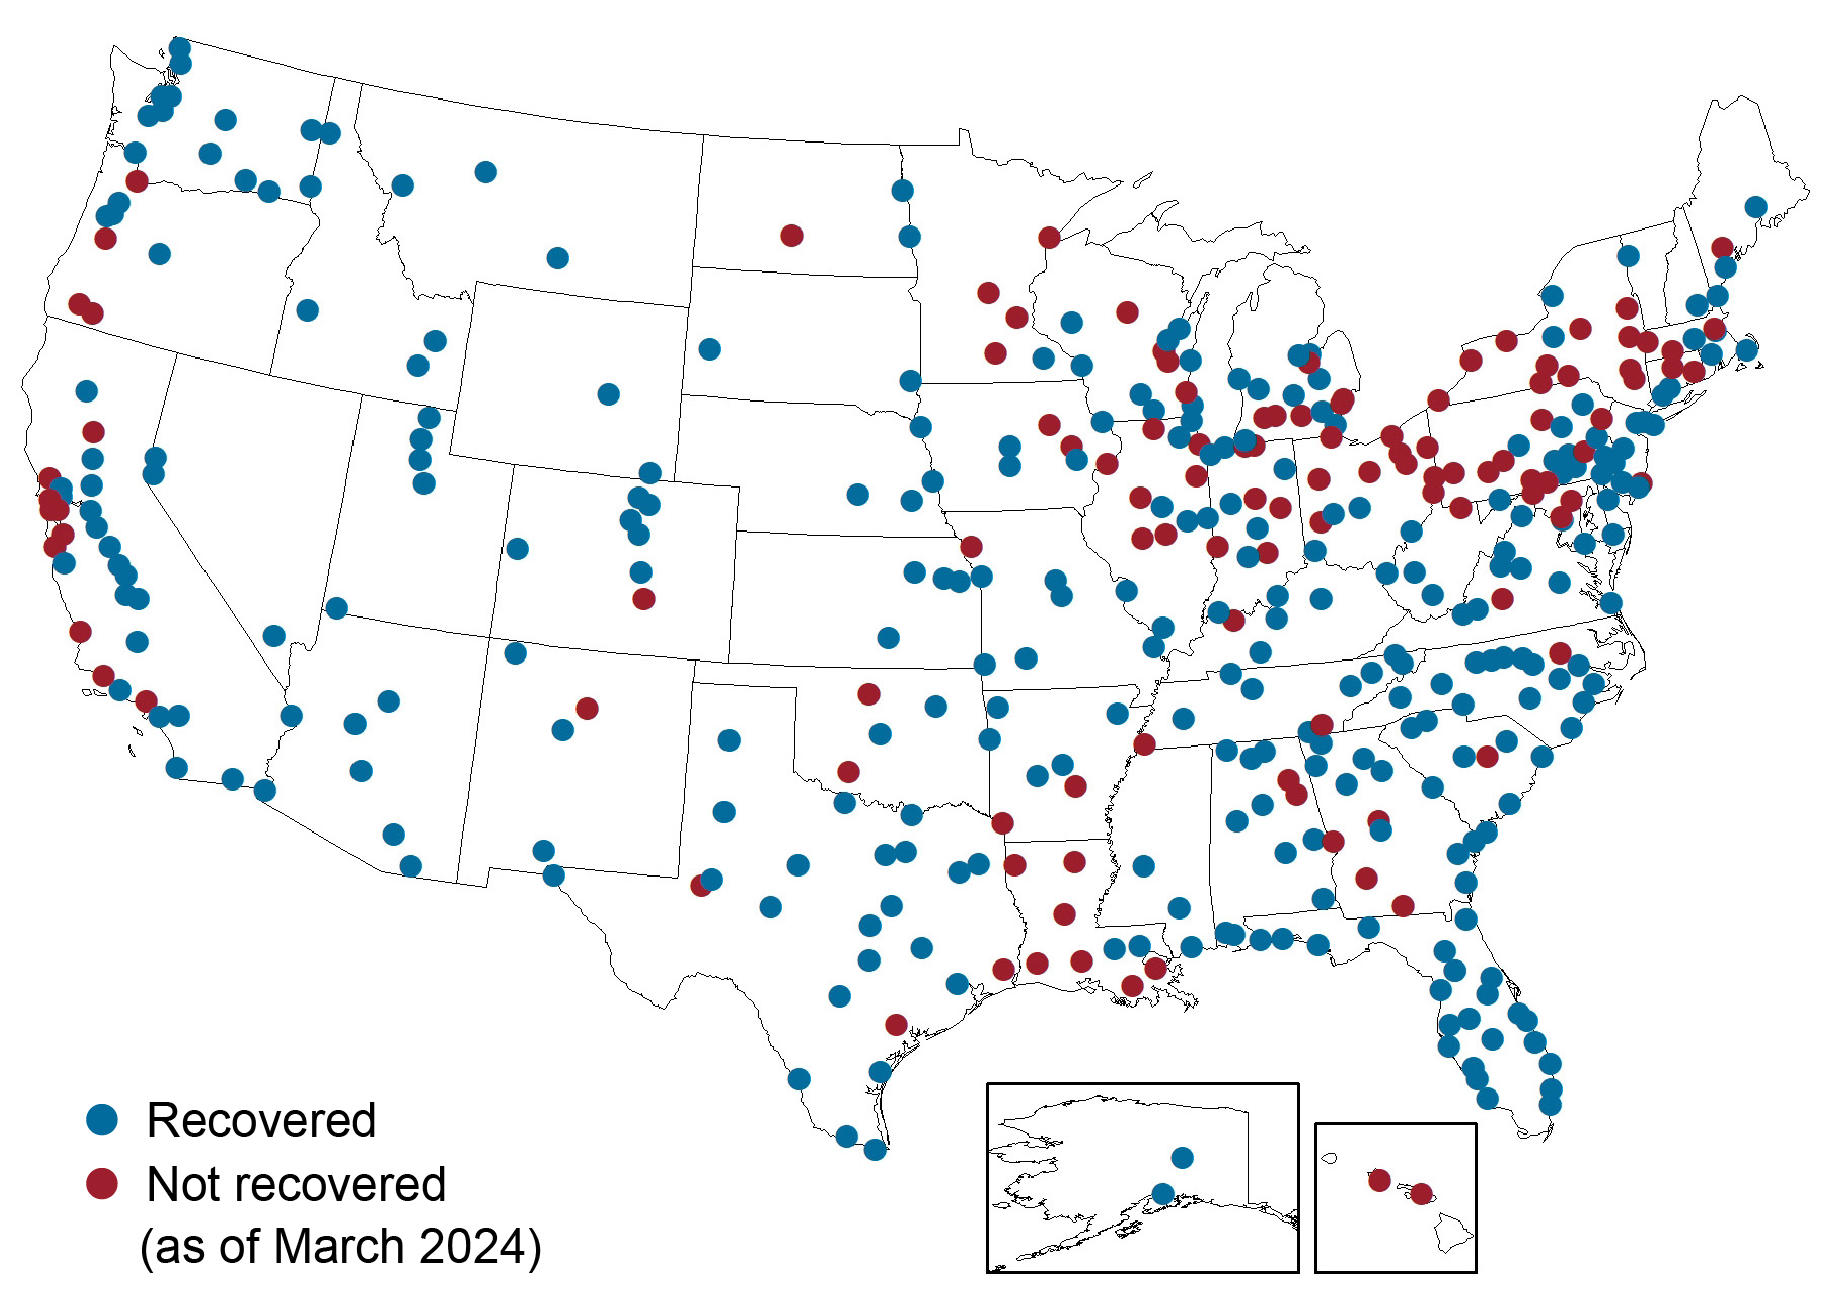 Map of the United States, with blue dots indicating regions where employment has recovered from the pandemic recession as of March 2024 and red dots indicating those where it has not. 